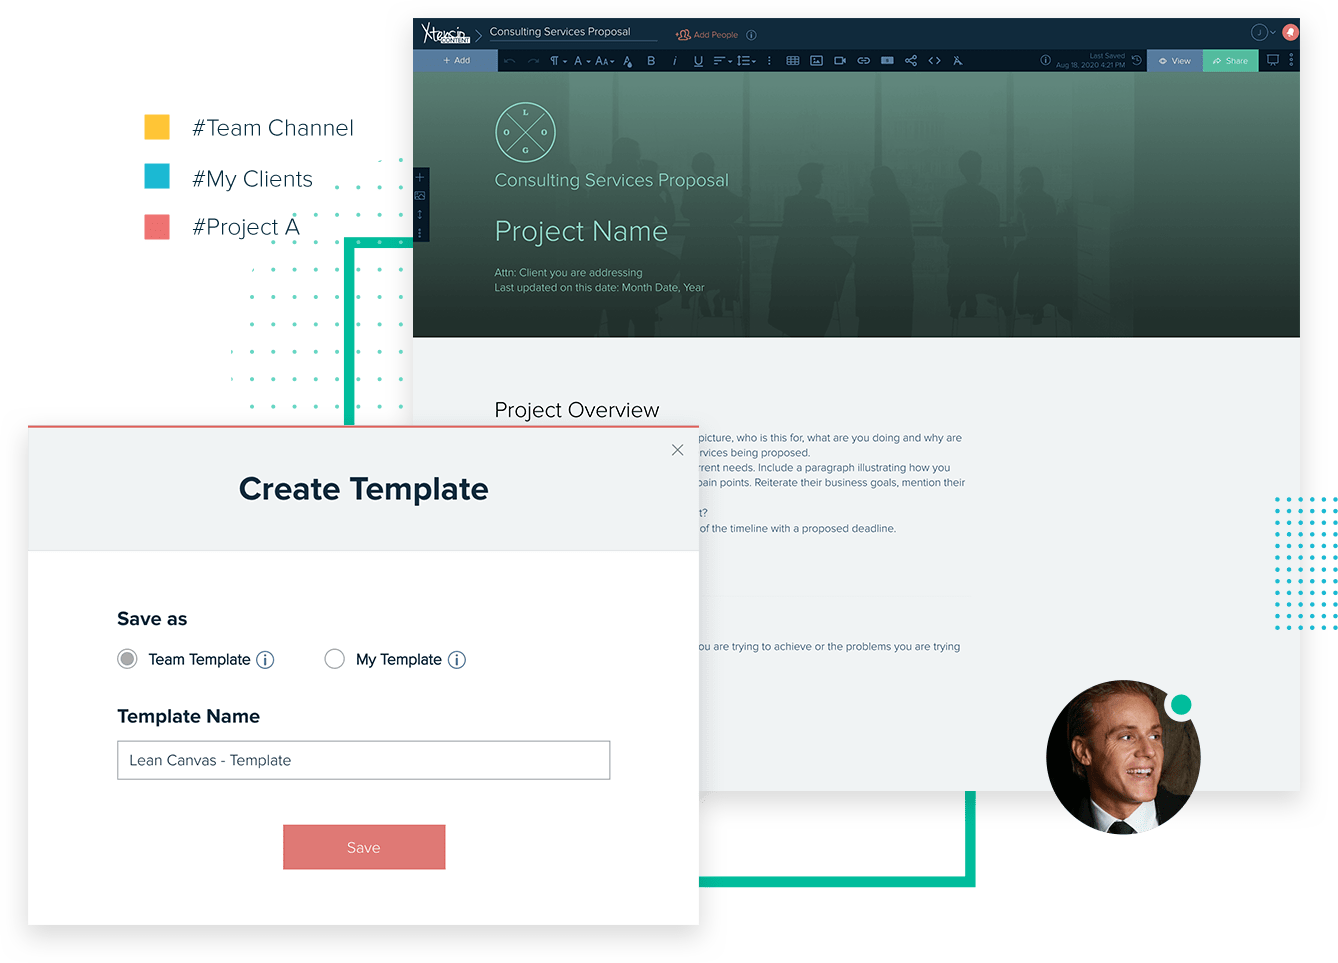 Xtensio Dashboard View With Consulting Services Proposal Template, Create Template Module Among Other Features